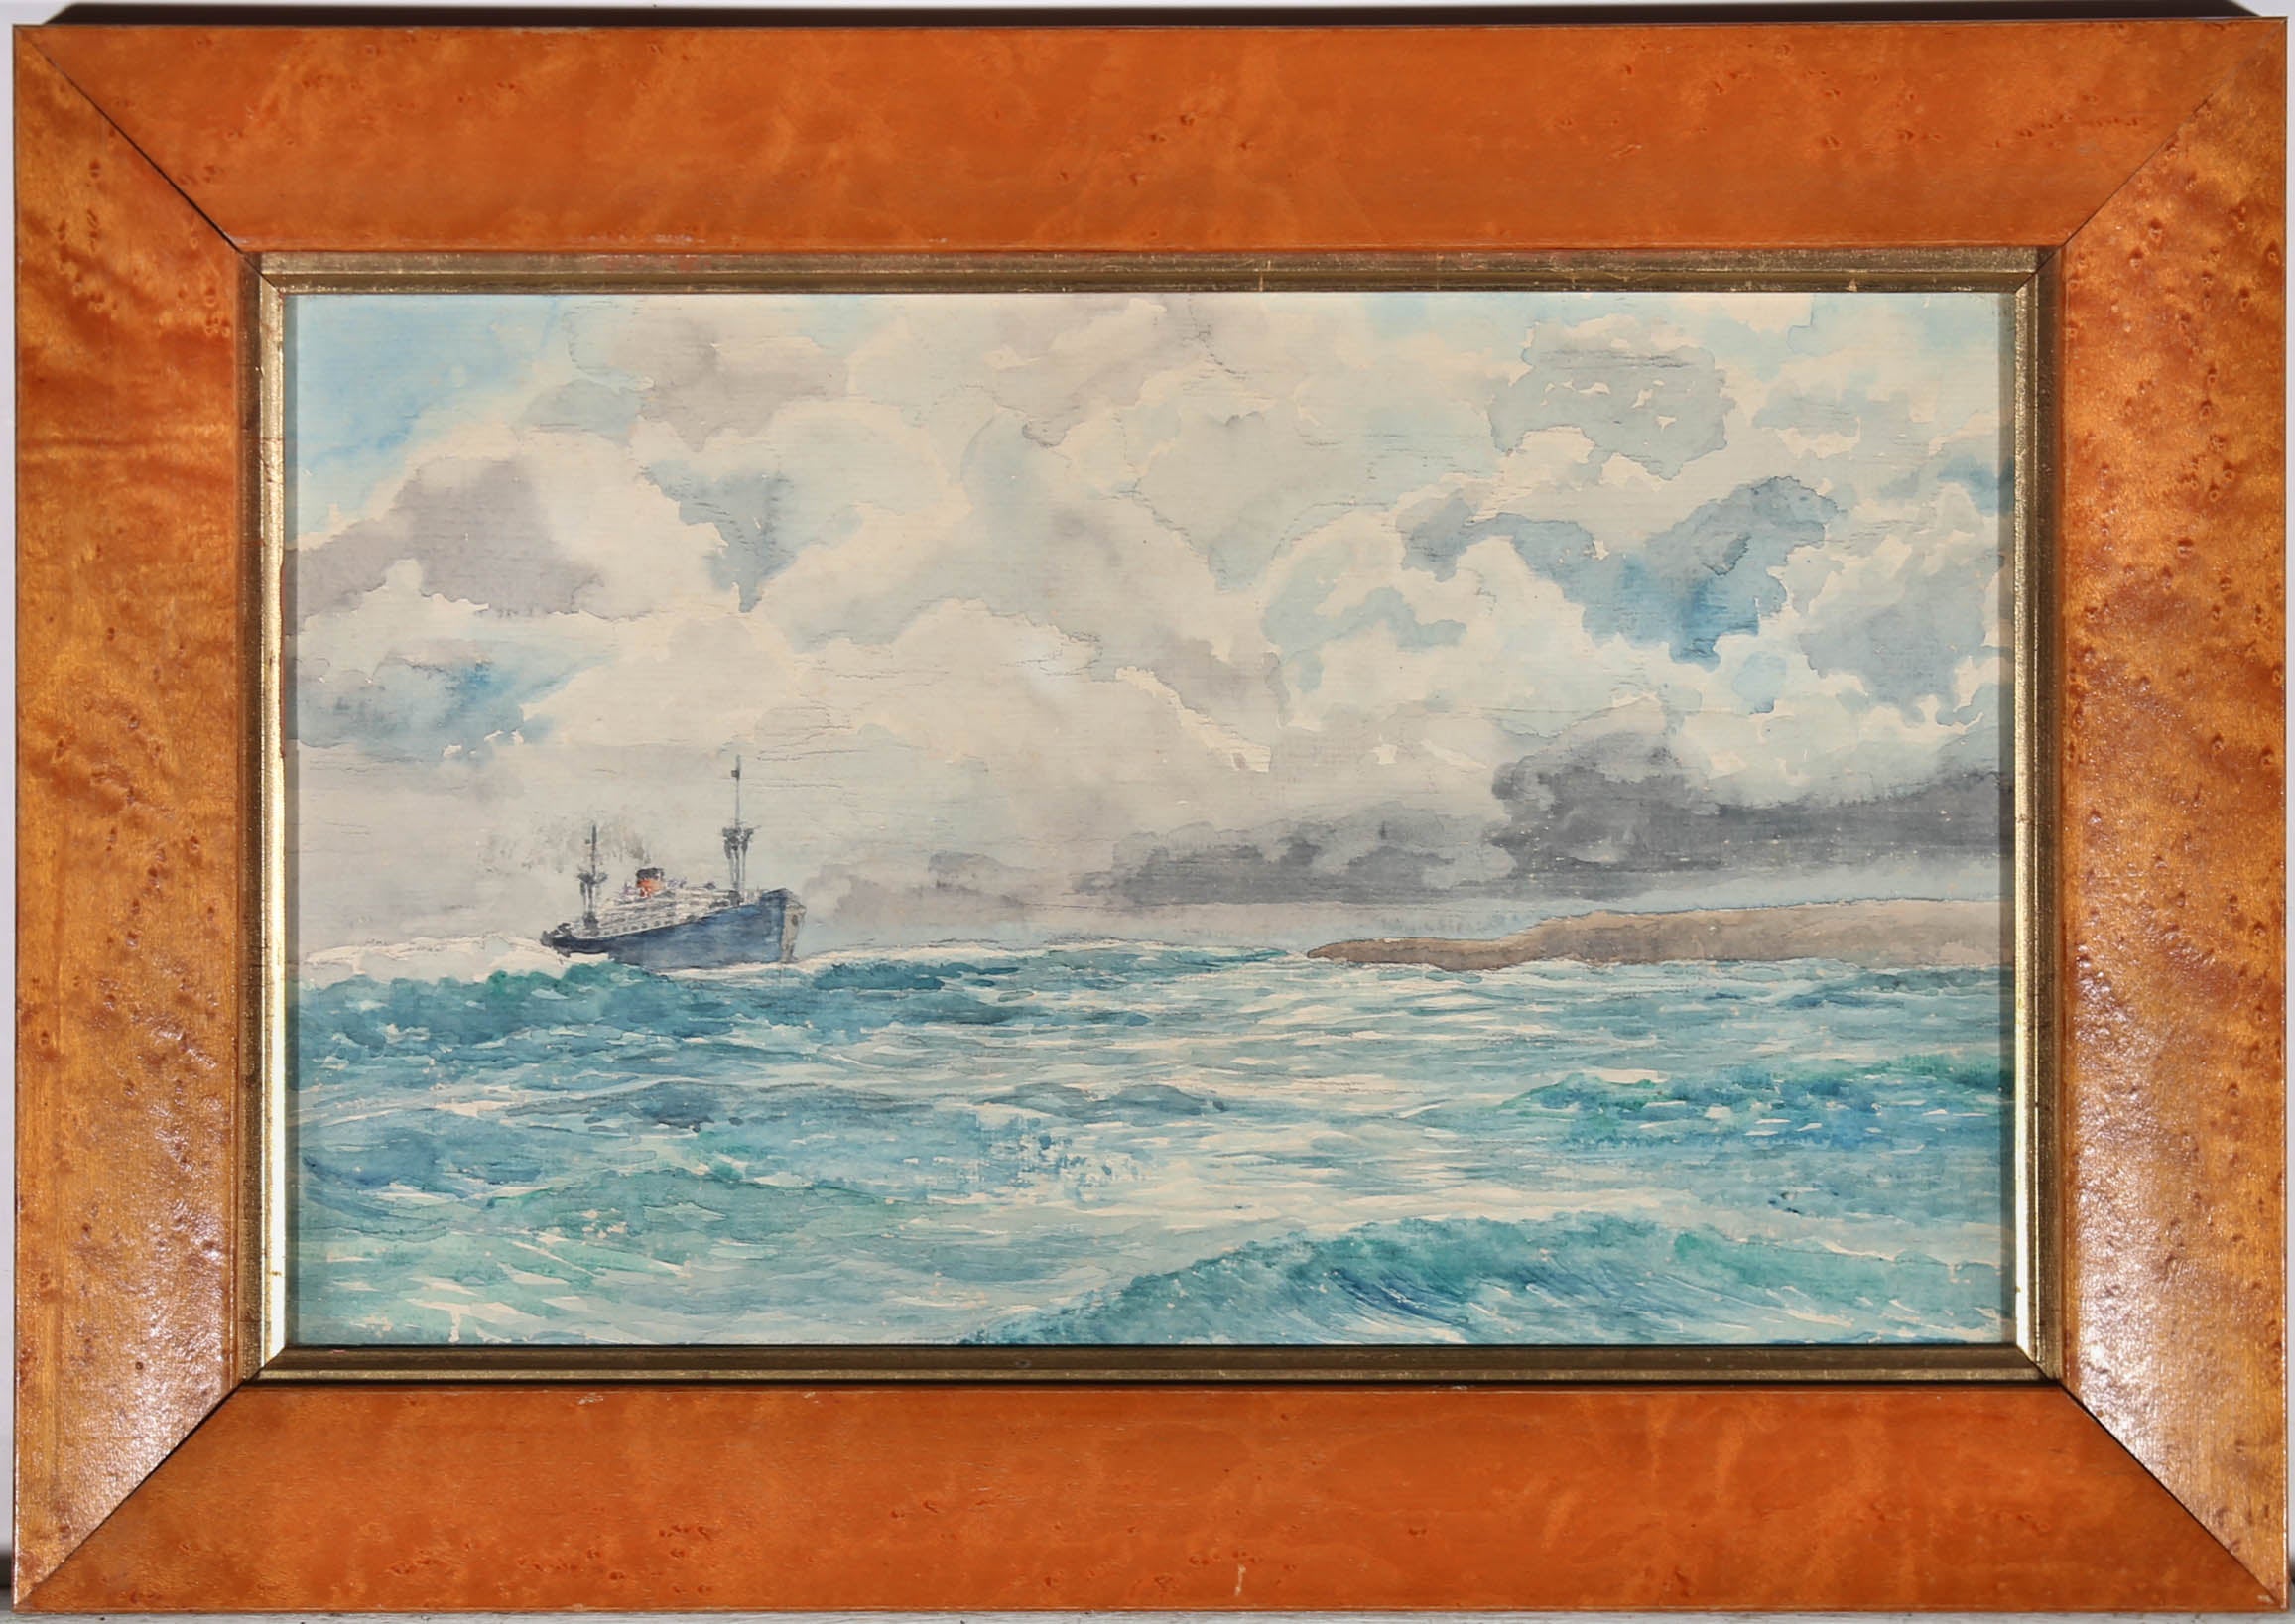 A decorative watercolour scene of a steam ship making its way over the heavy sea and just off the coast from land. The work has been left unsigned but appears to be in the manner of W.M Birchall with similar compositions and brushstroke techniques.